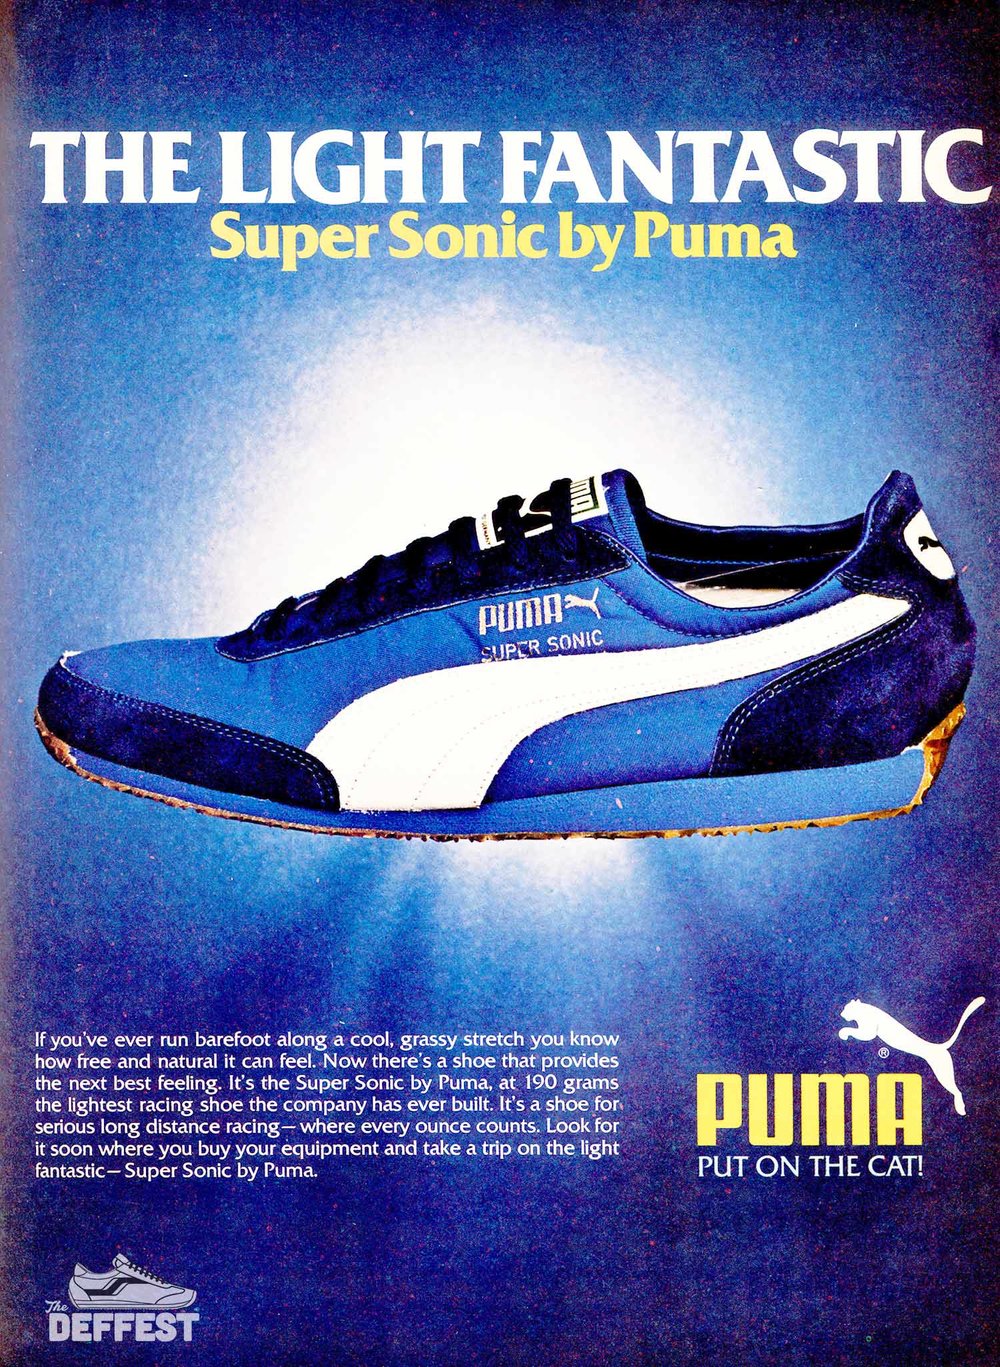 80s Puma — The A Vintage And Retro Sneaker — Vintage Ads | atelier-yuwa ...